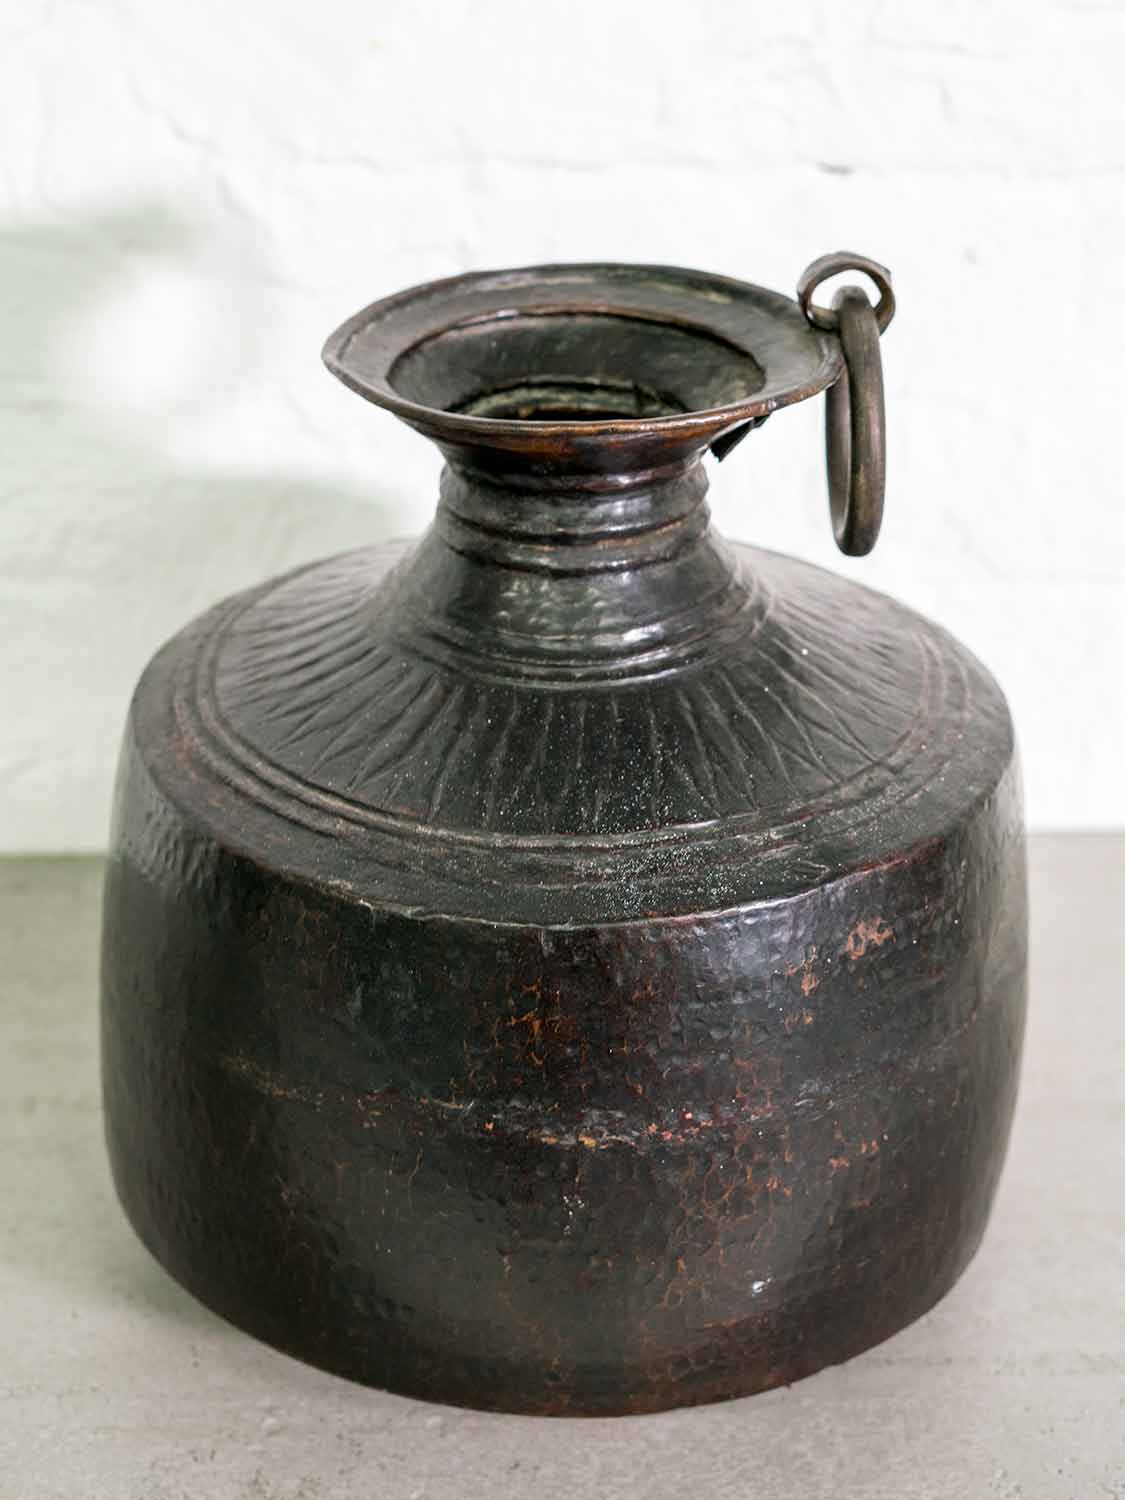 A blackened copper vase that's an everyday water pot from India